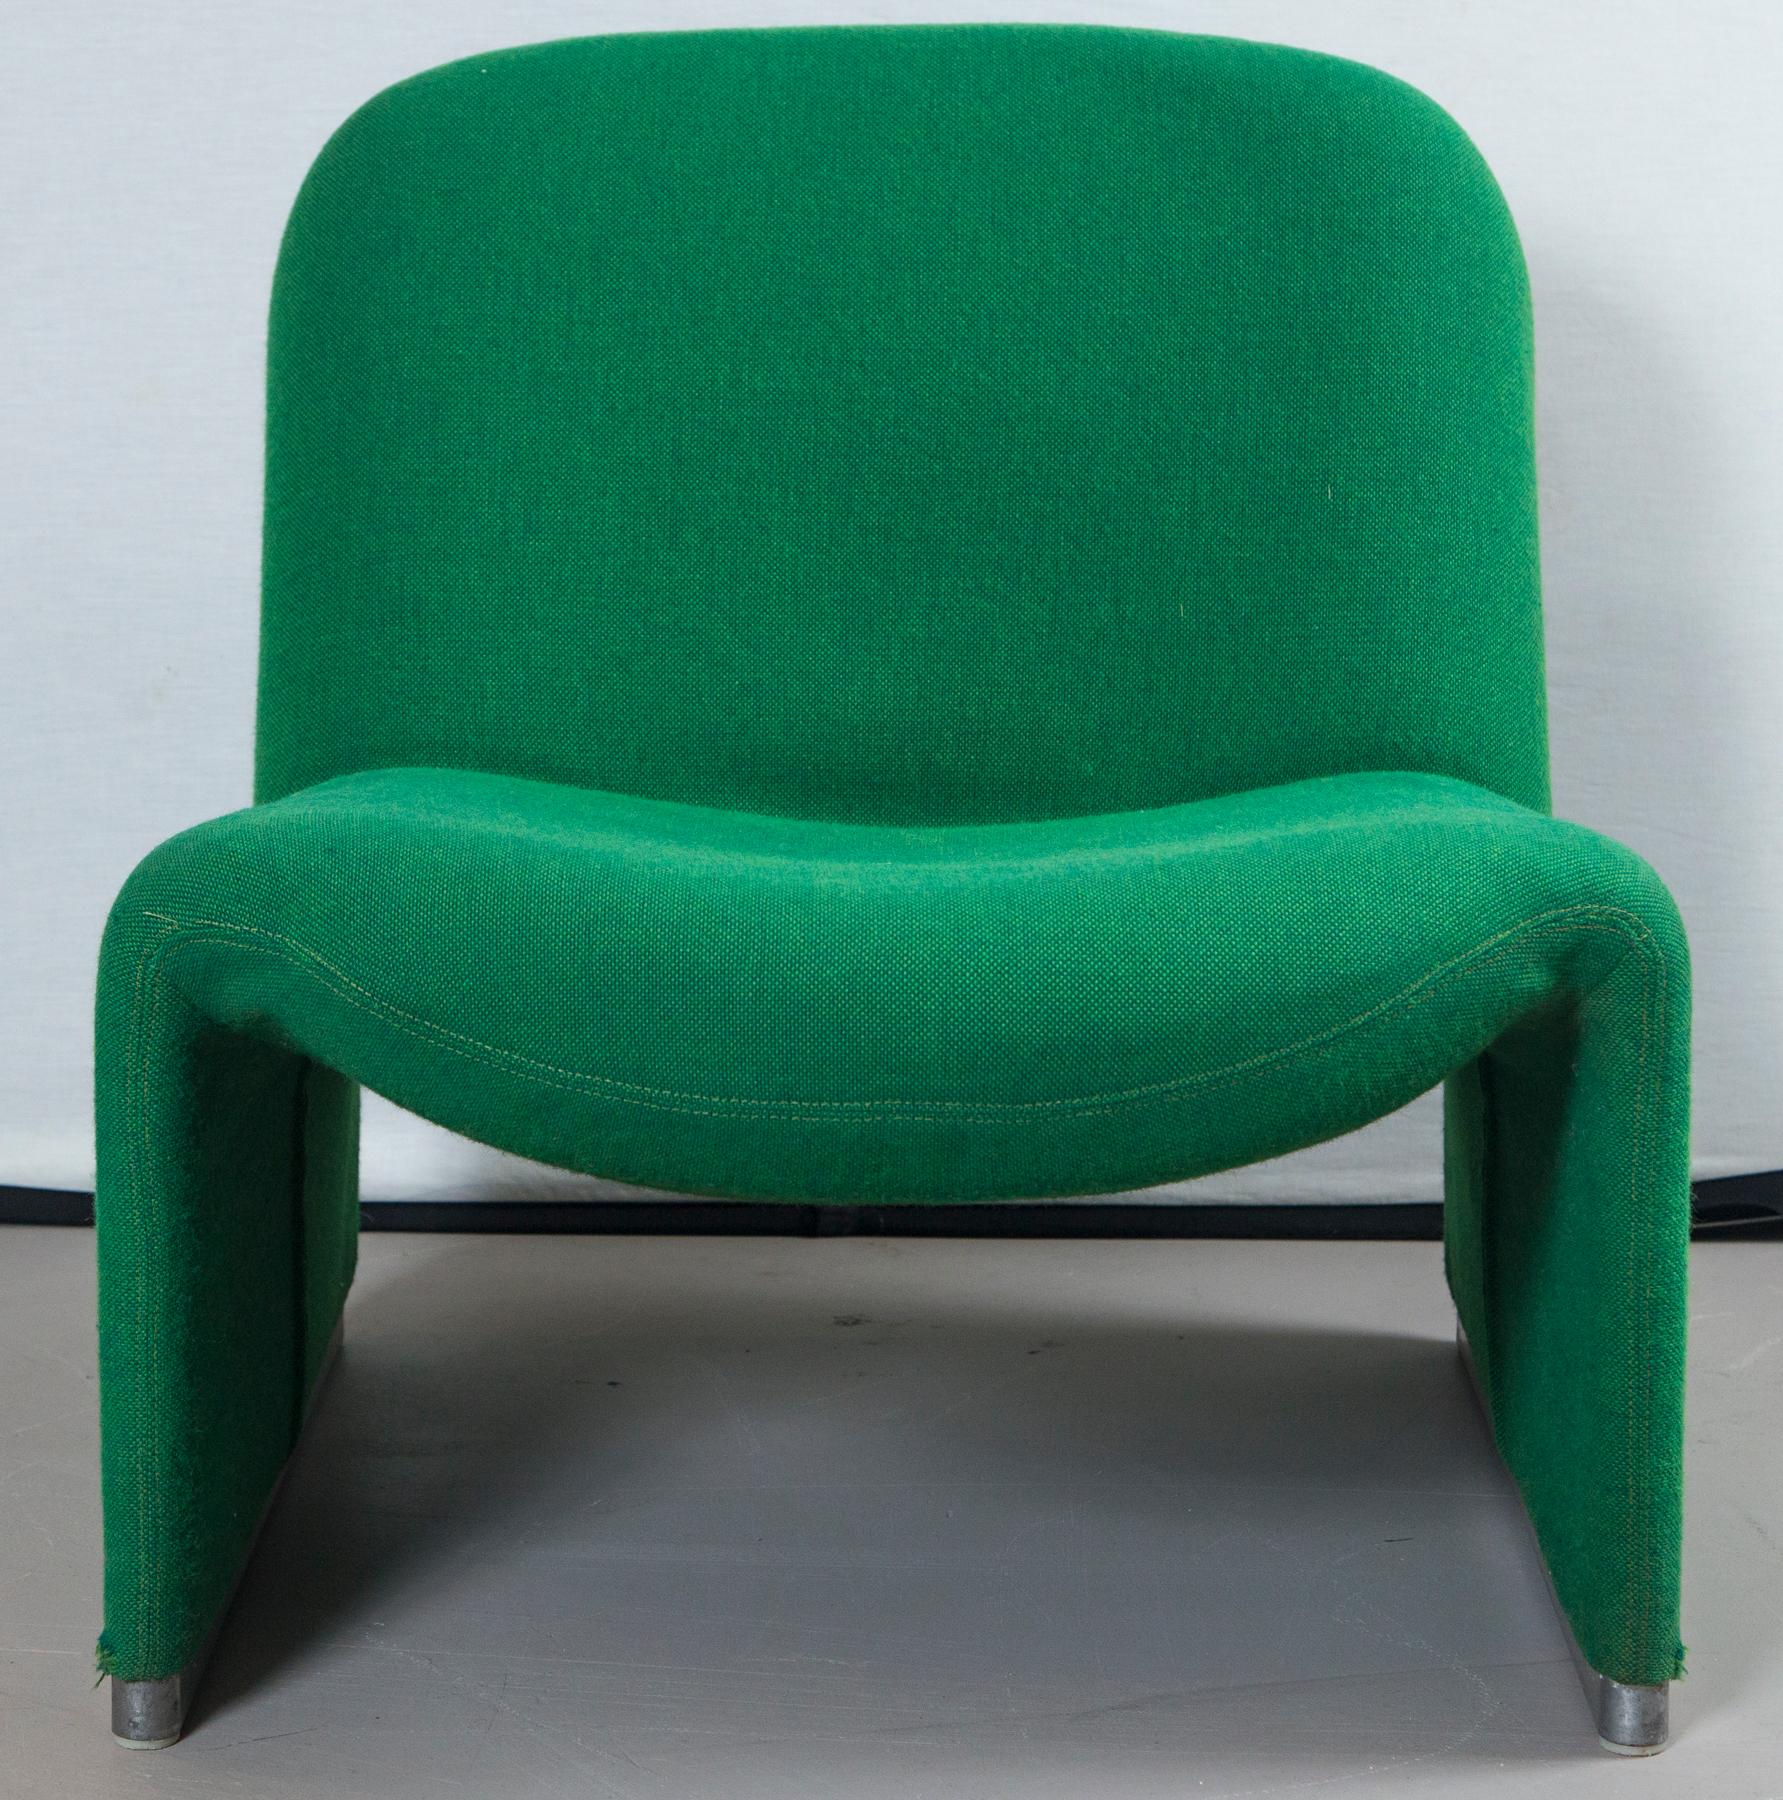 Pair of green alky chairs by Giancarlo Piretti for Castillo, 1970s, original upholstery.